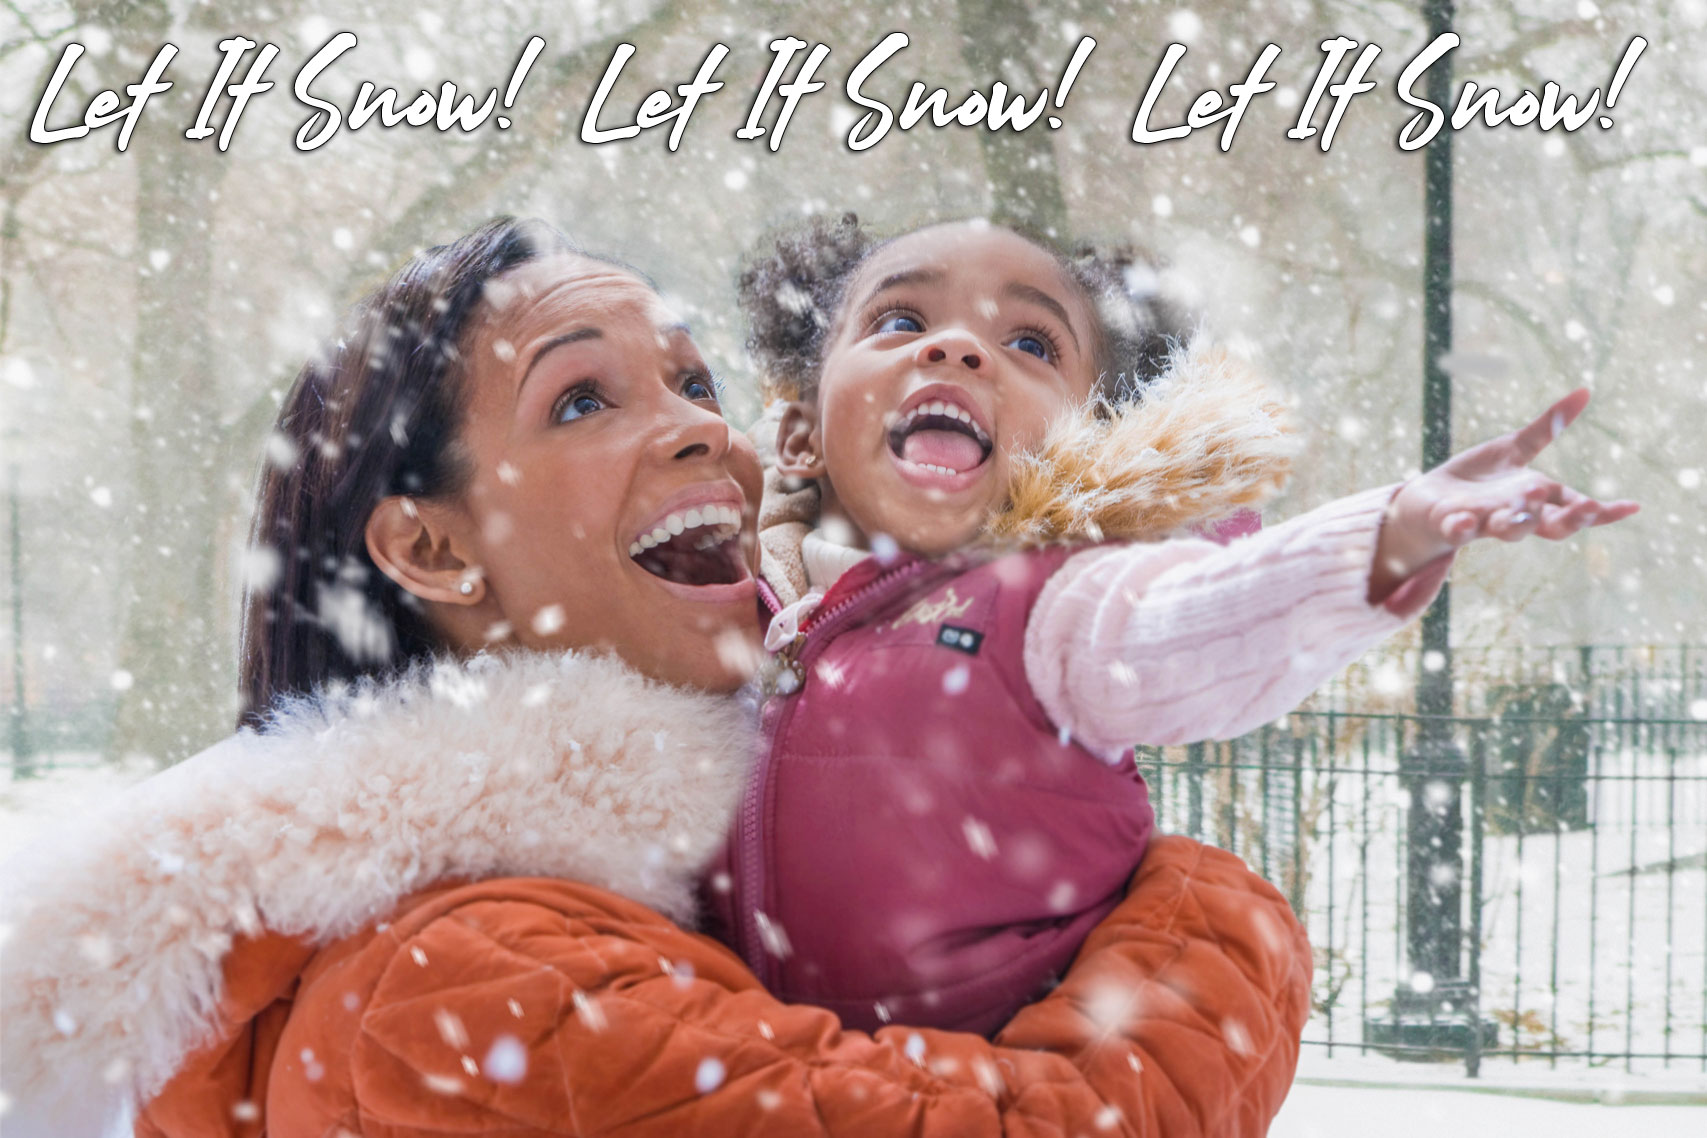 Christmas carol spotlight: Let It Snow! Let It Snow! Let It Snow! - "Let It Snow! Let It Snow! Let It Snow!" is a beloved Christmas tune with an interesting history. #LetItSnow